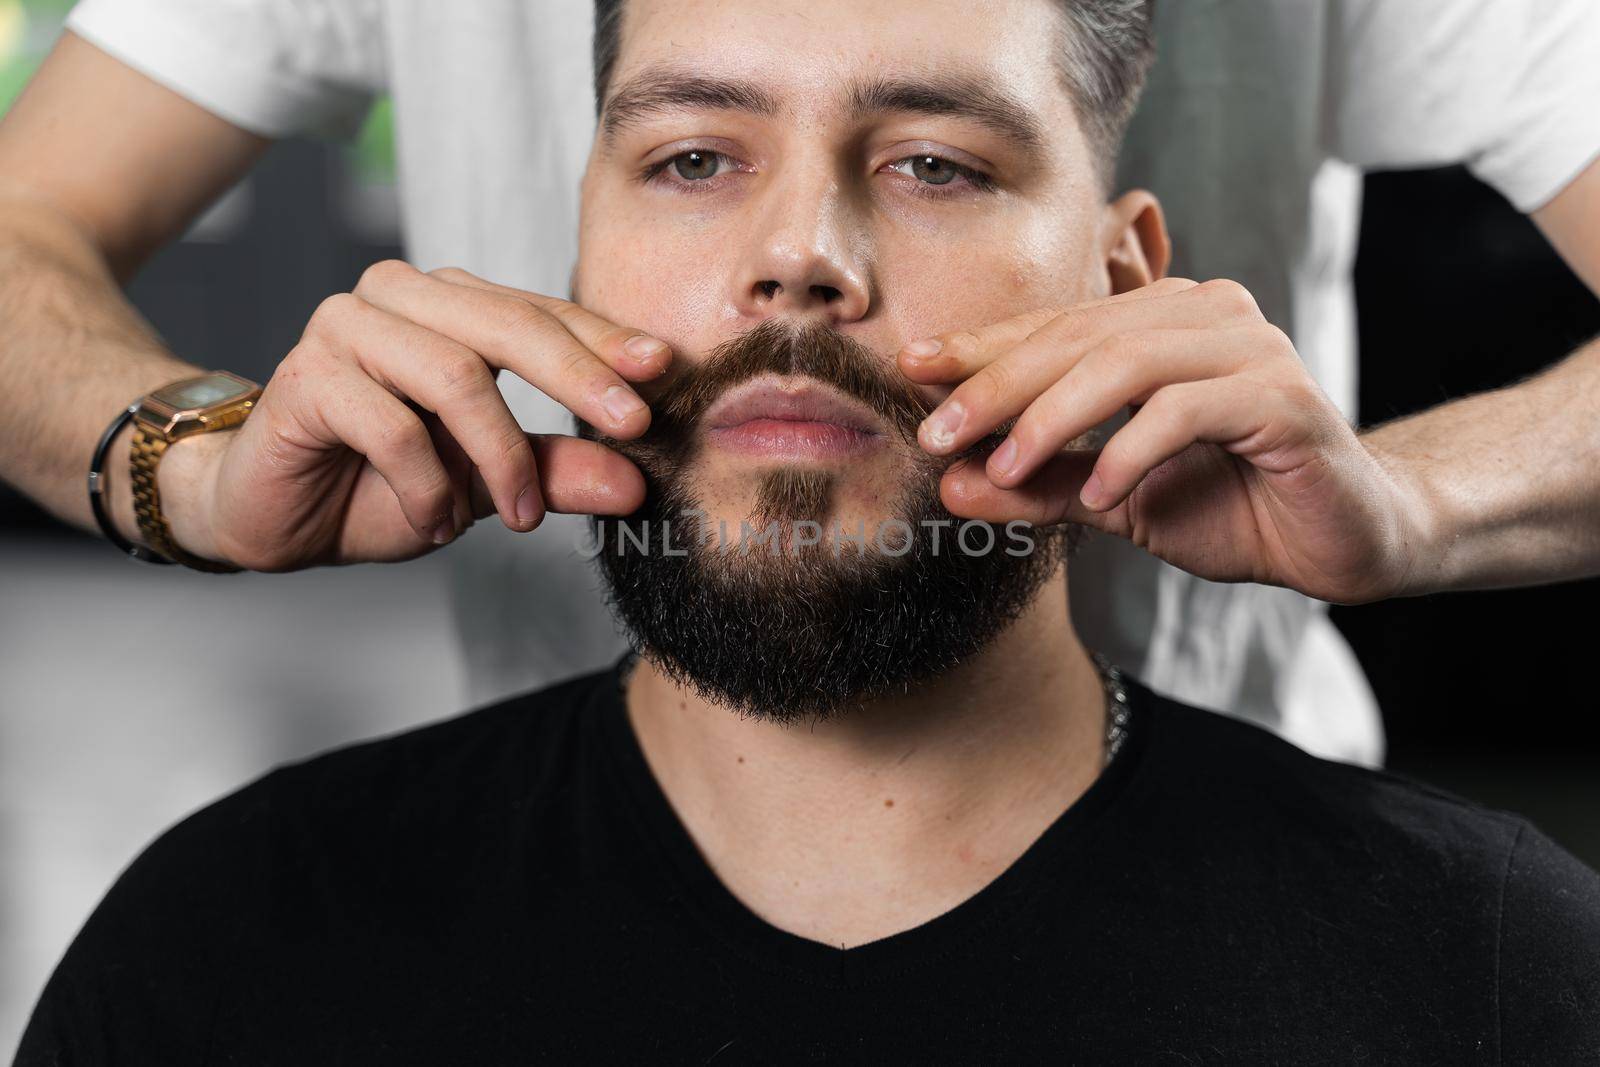 Fixing the shape of mustache with wax. The result of a haircut in a barbershop. by Rabizo